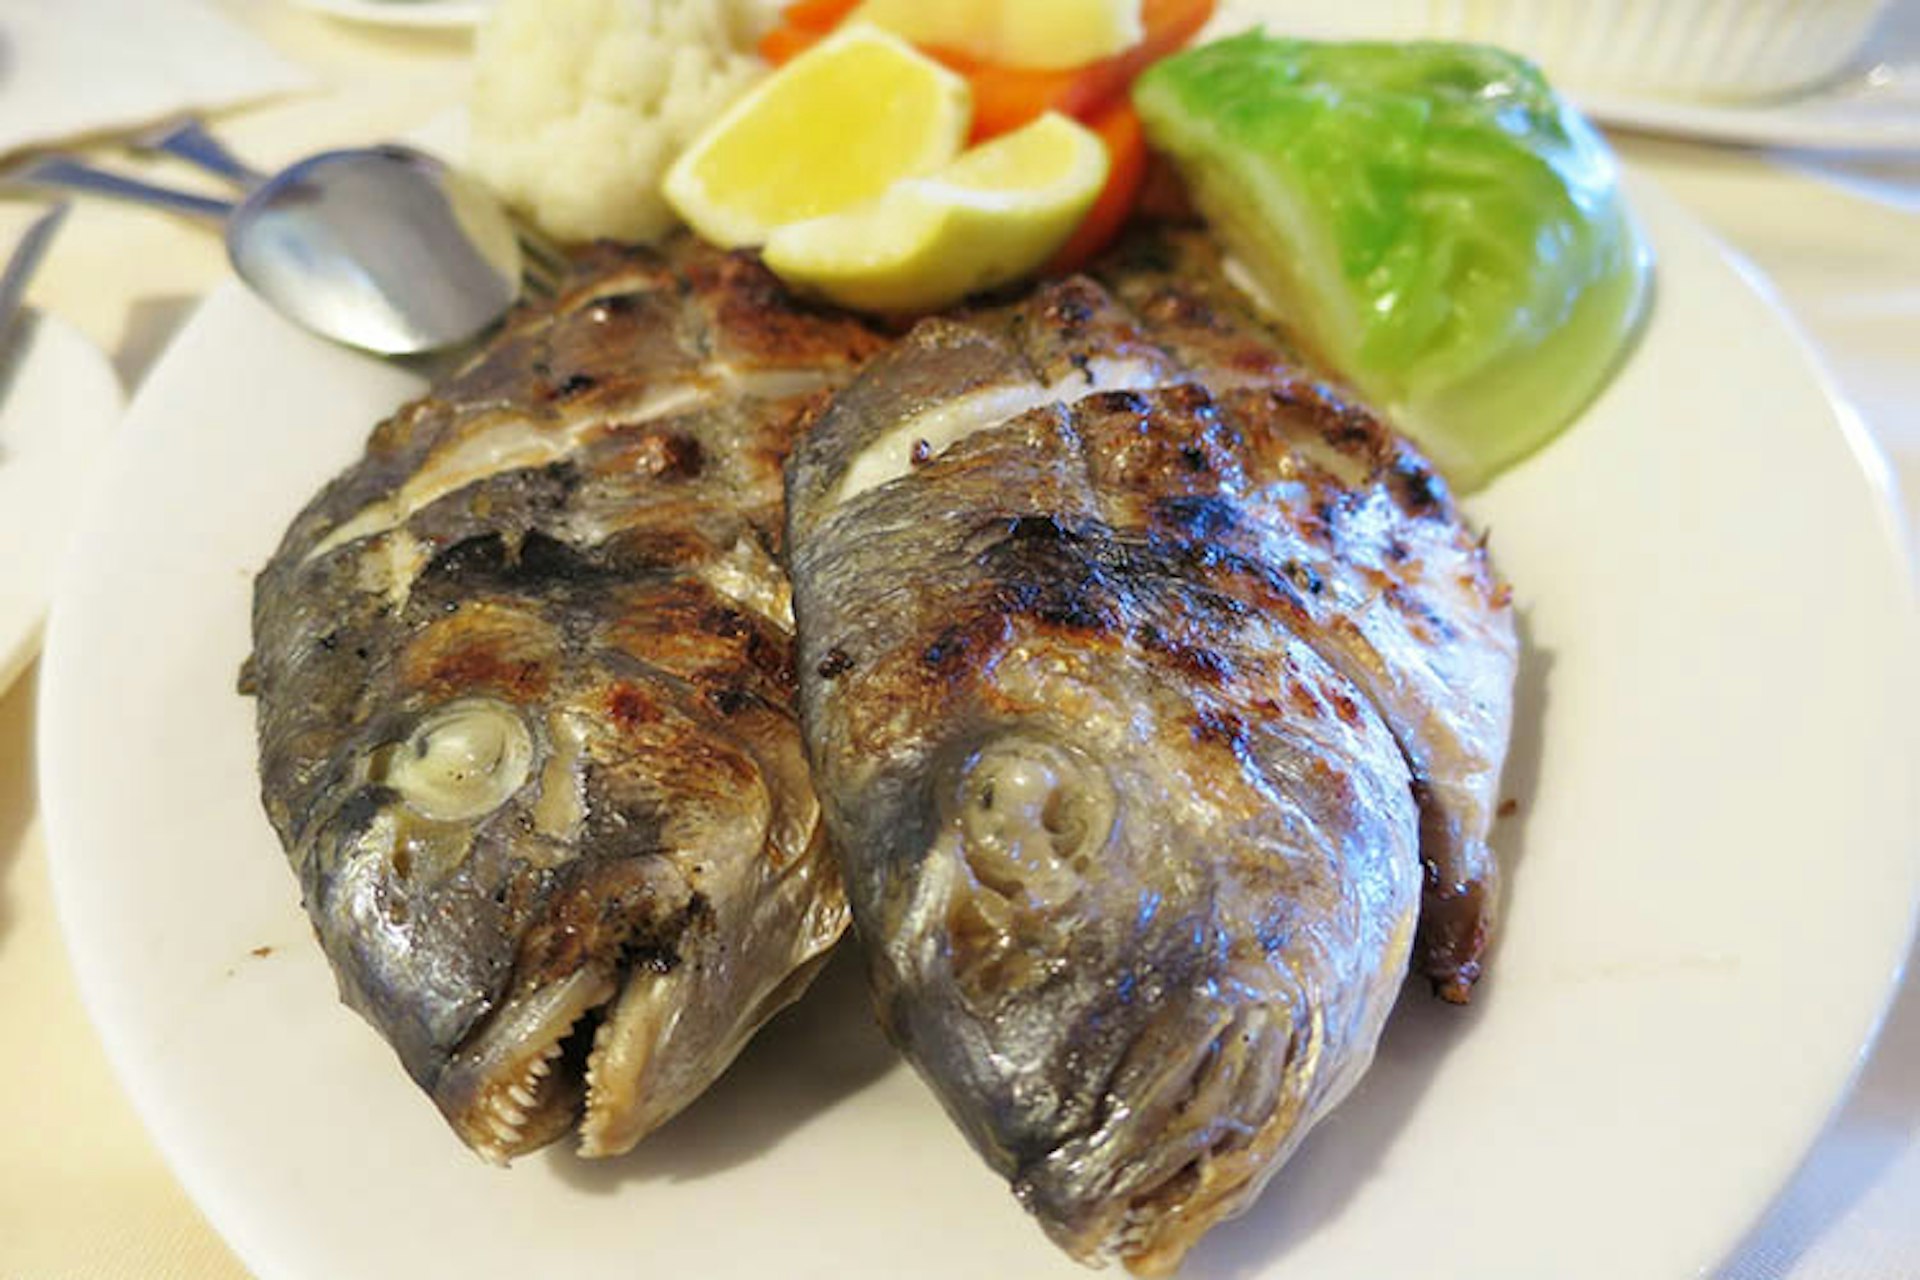 Grilled sea bass. Image by Megan Eaves / Lonely Planet